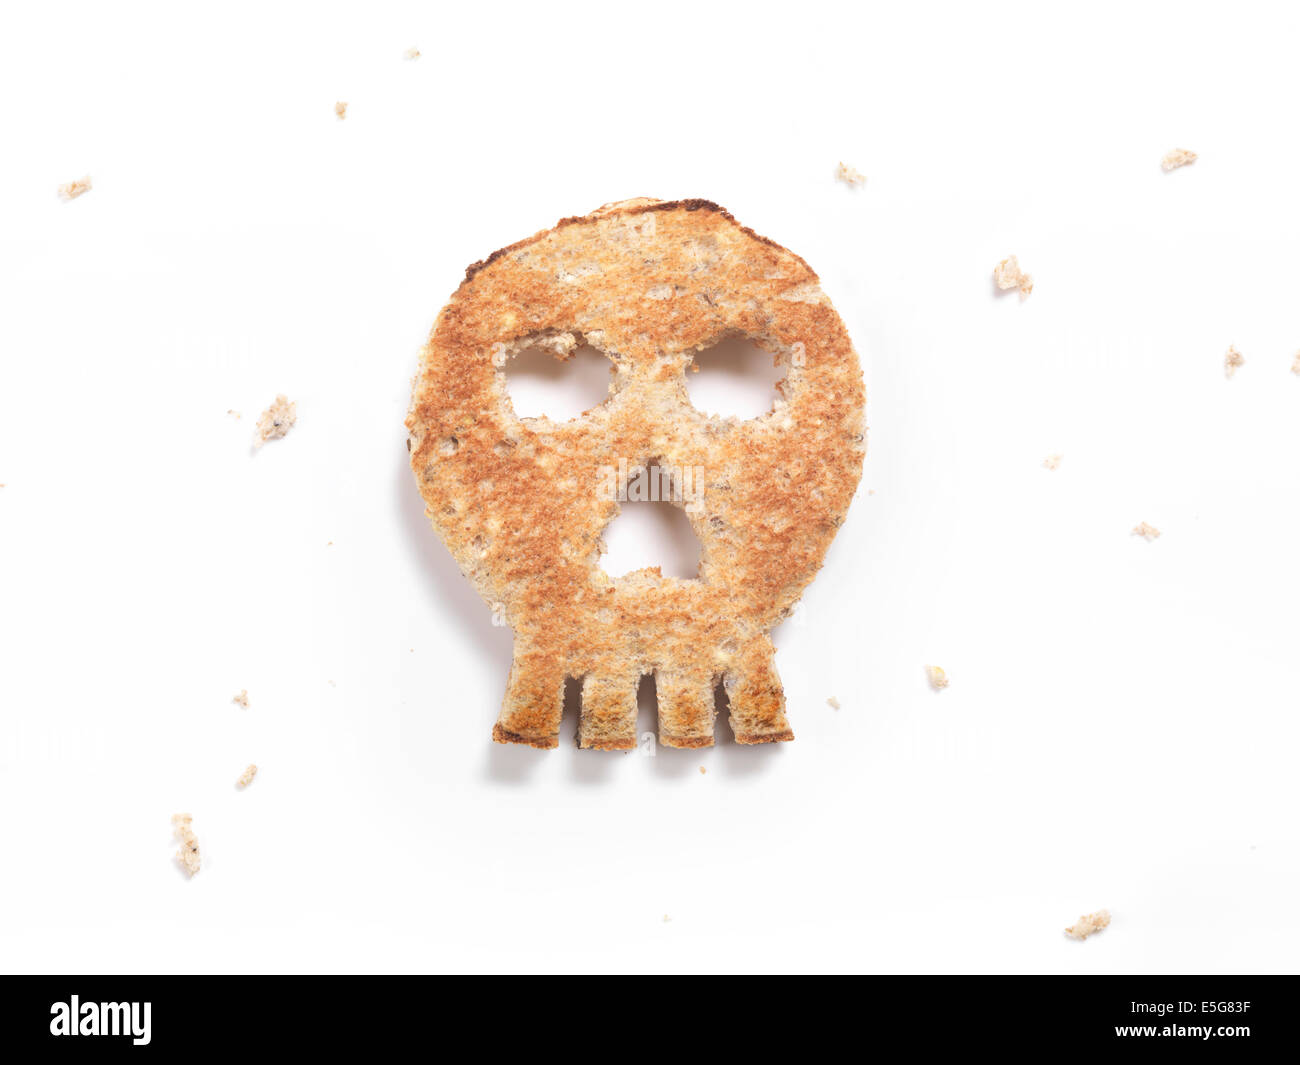 Skull made of toasted bread isolated on white background Stock Photo